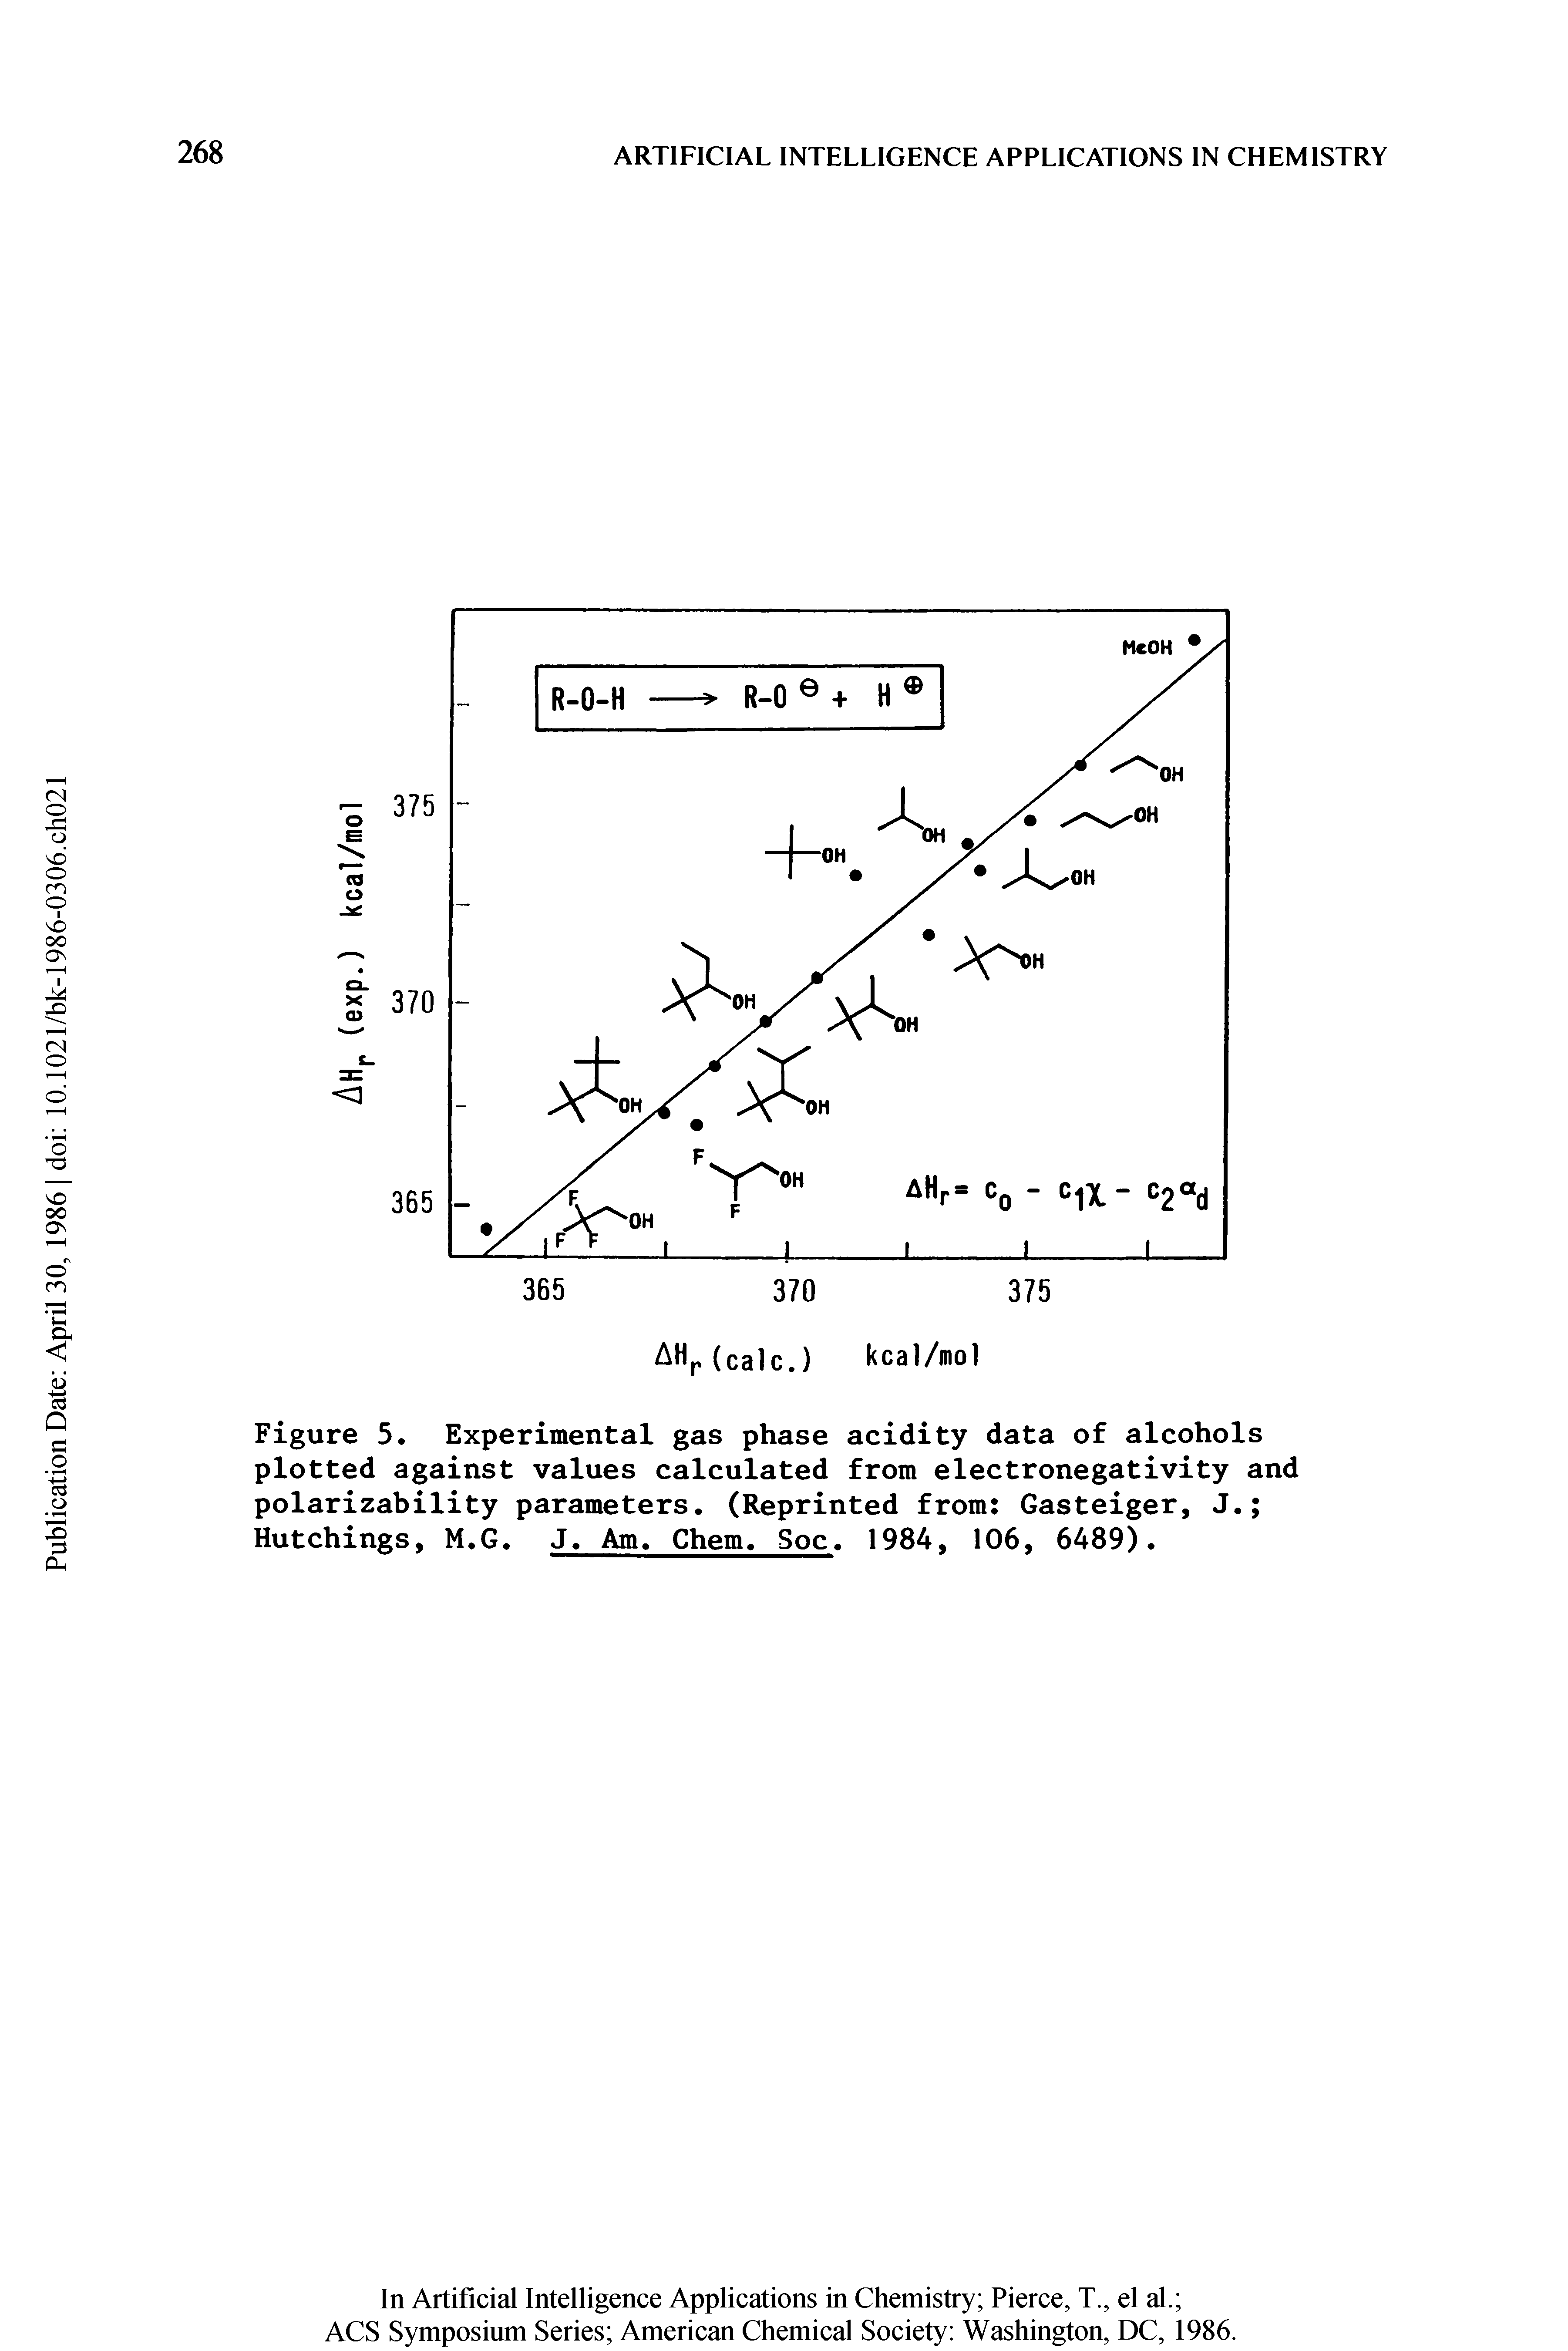 Figure 5, Experimental gas phase acidity data of alcohols plotted against values calculated from electronegativity and polarizability parameters. (Reprinted from Gasteiger, J. Hutchings, M.G. J. Am. Chem. Soc. 1984, 106, 6489).